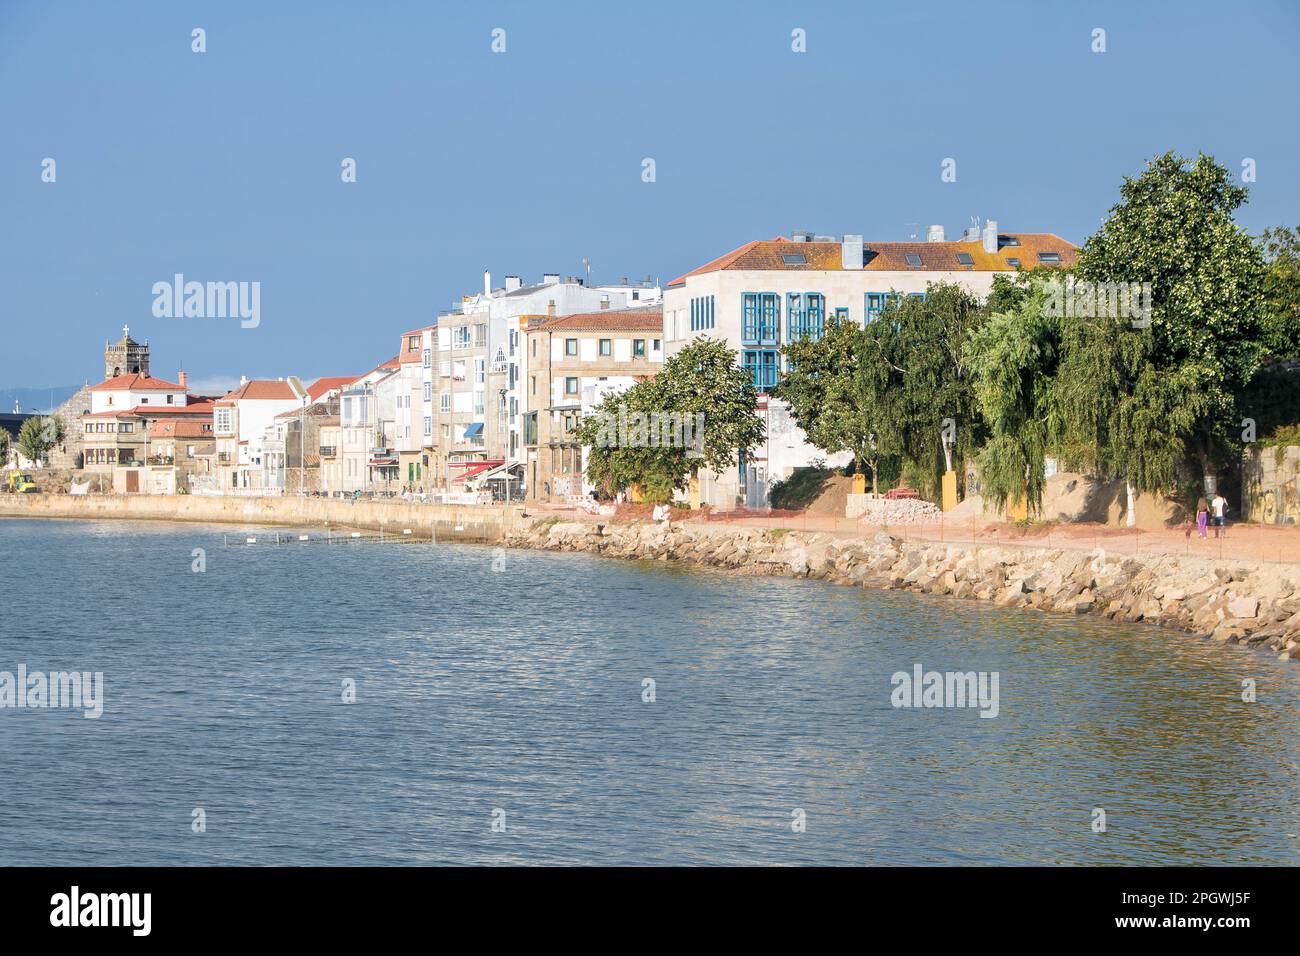 View of the village of Bouzas in Galicia, Spain Stock Photo